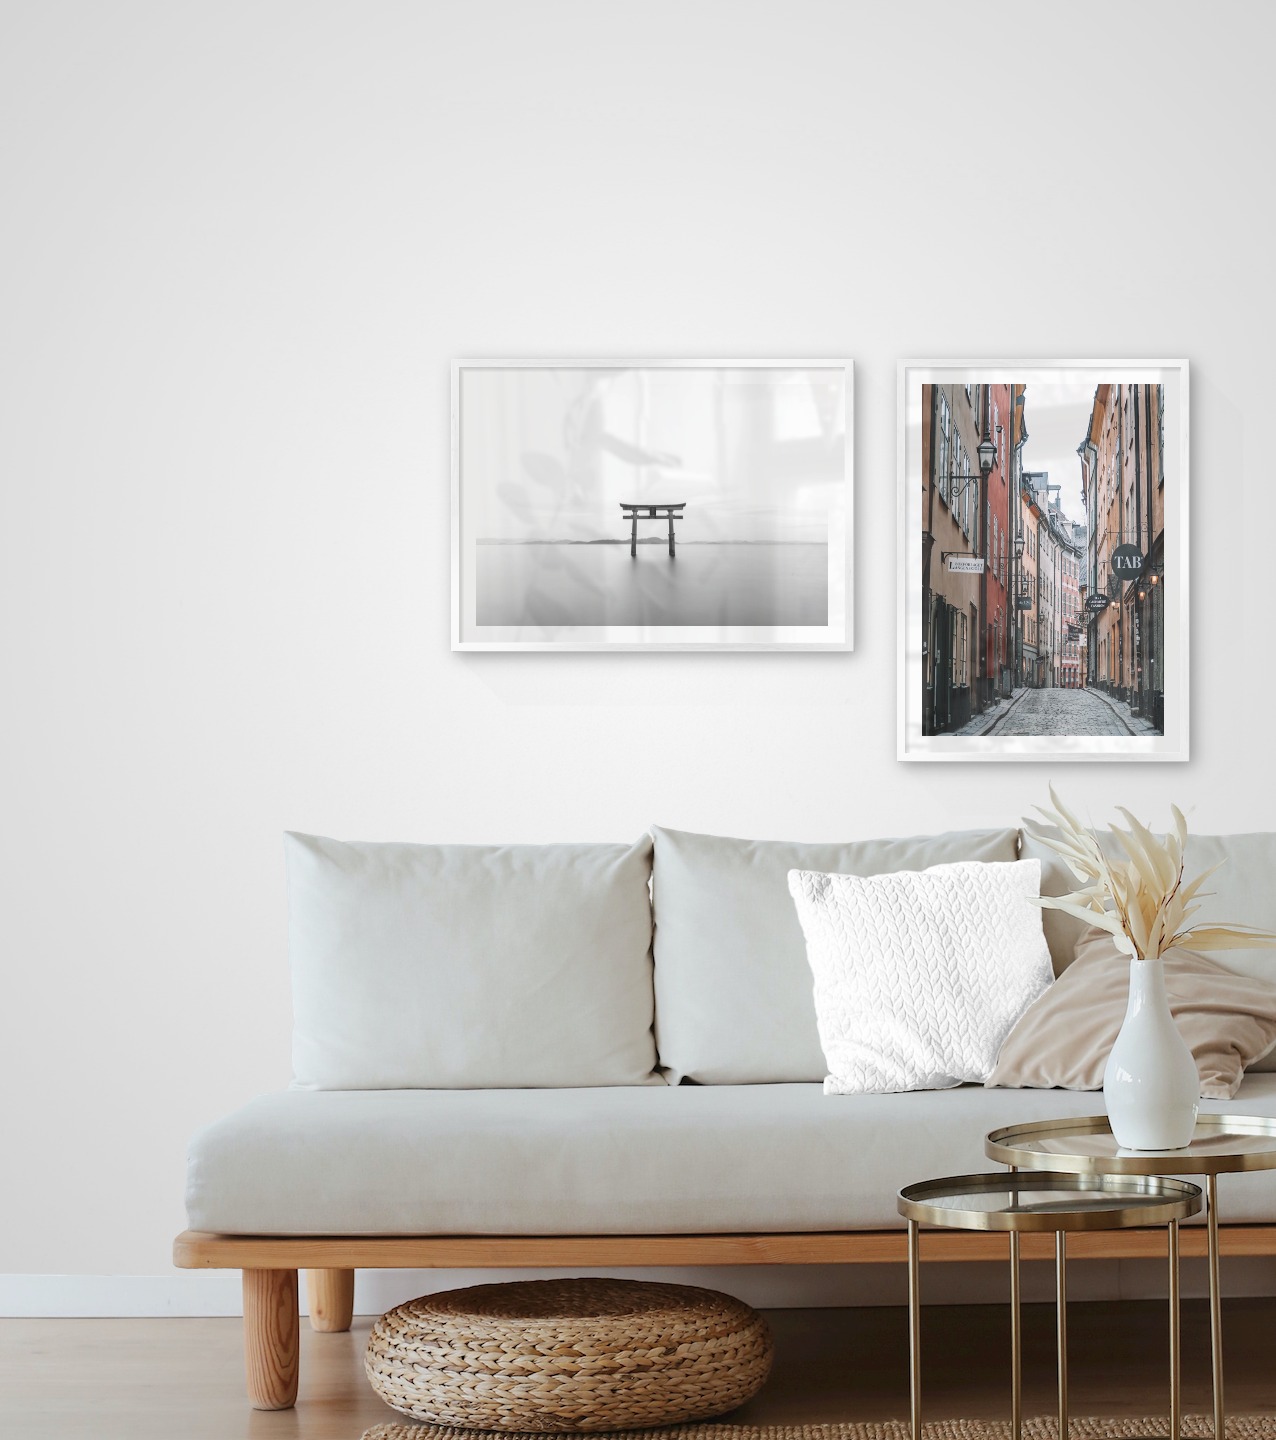 Gallery wall with picture frames in silver in sizes 50x70 with prints "Pillars in the water" and "Old town in Stockholm"